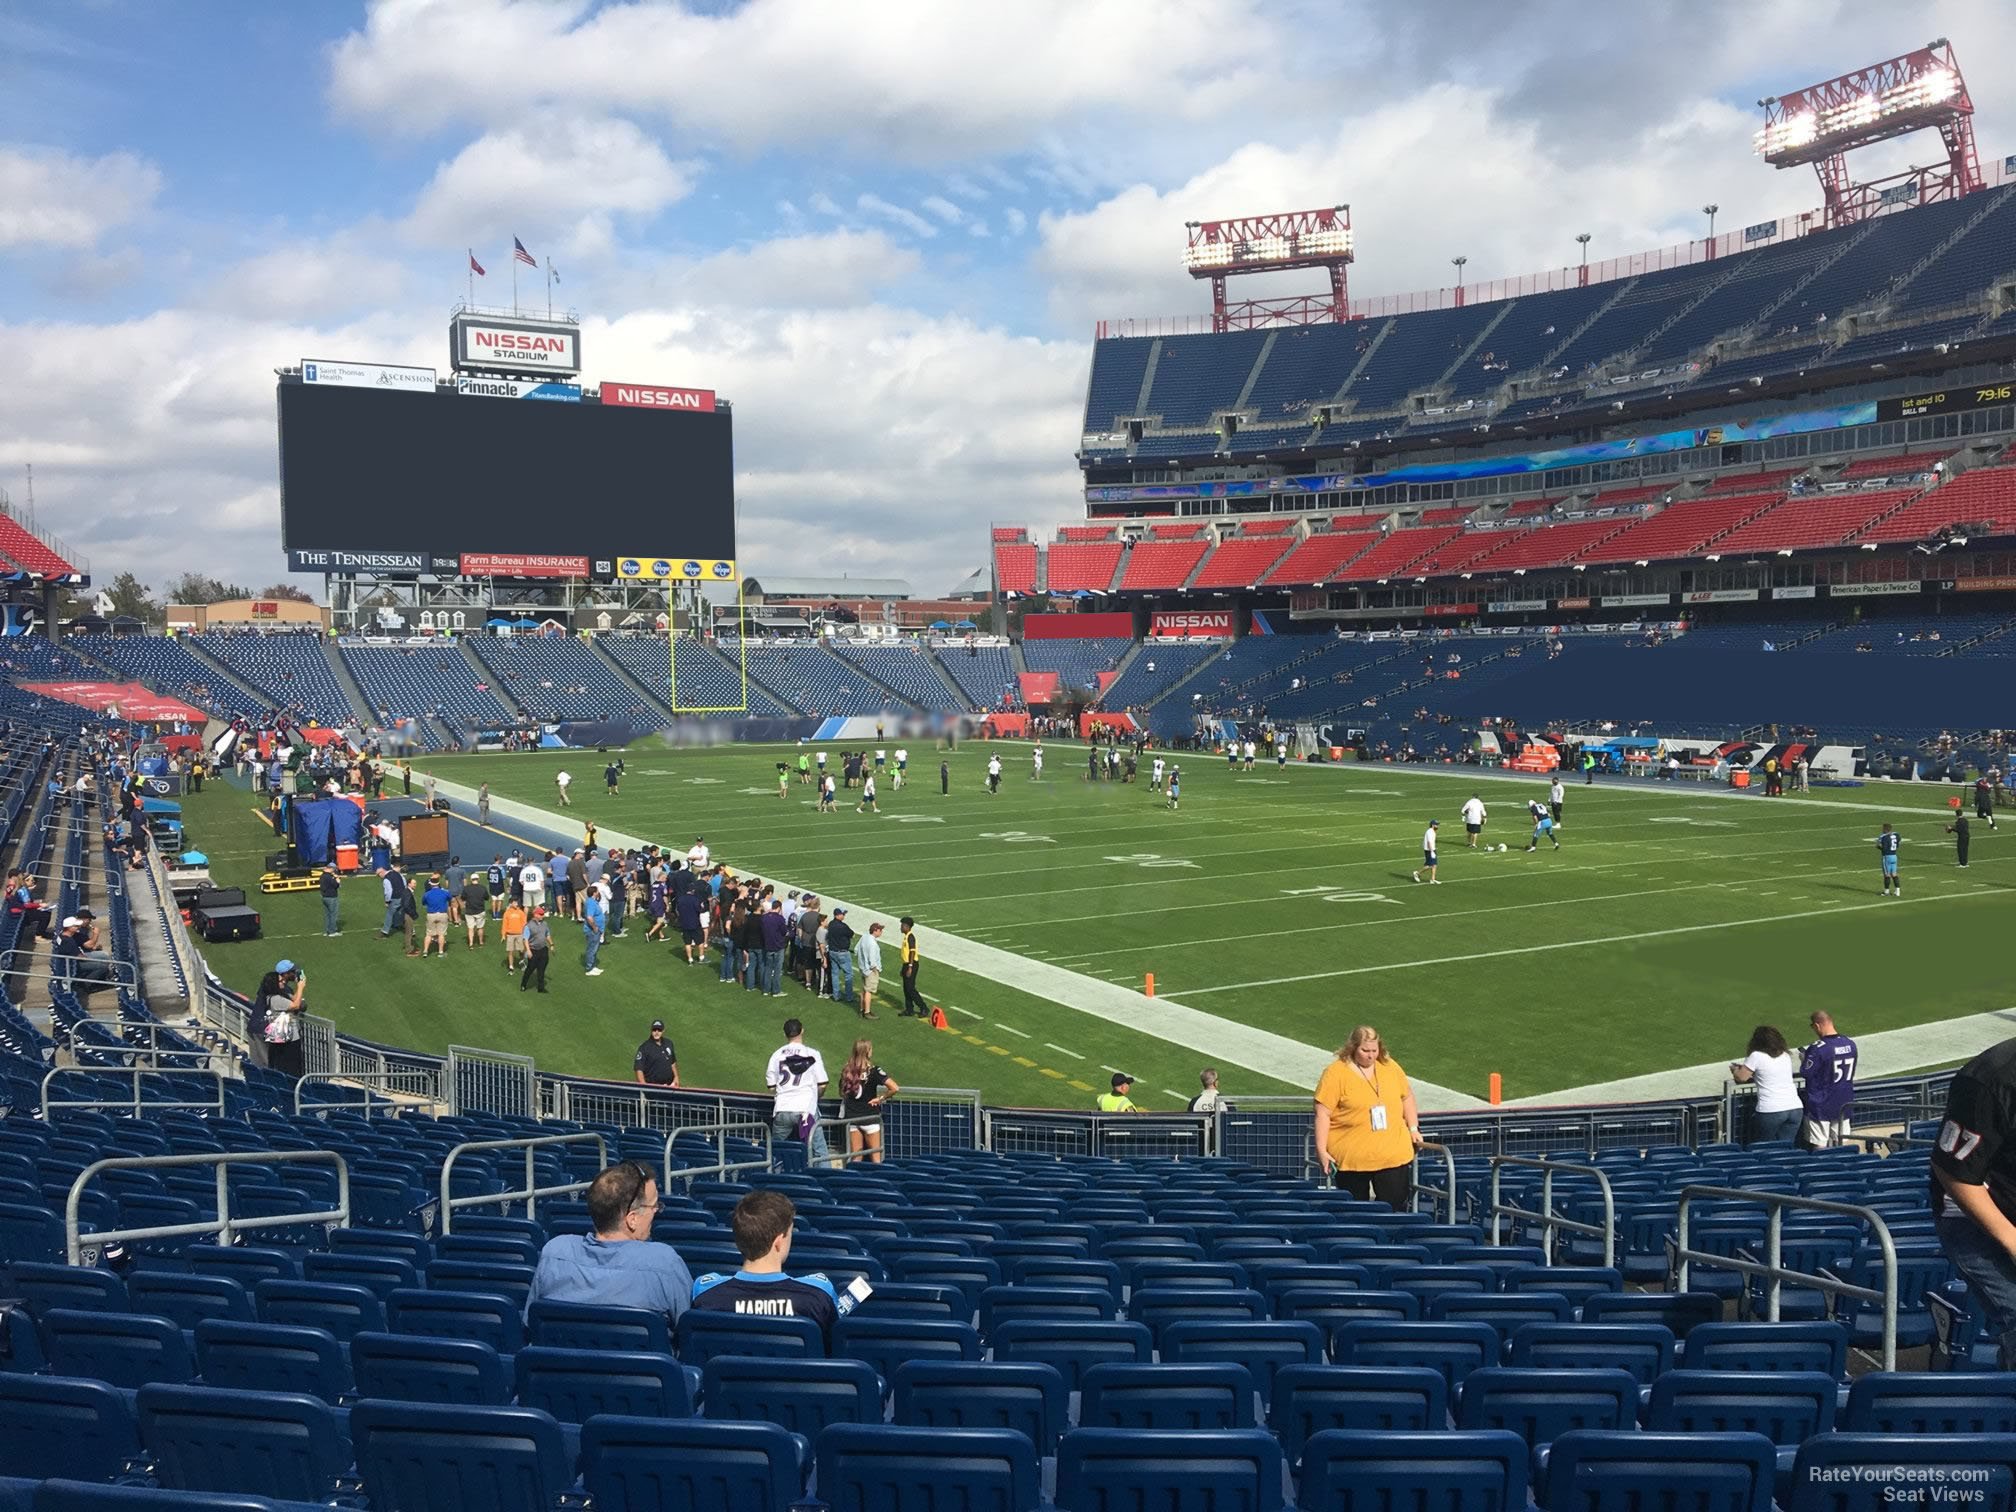 section 128, row aa seat view  for football - nissan stadium